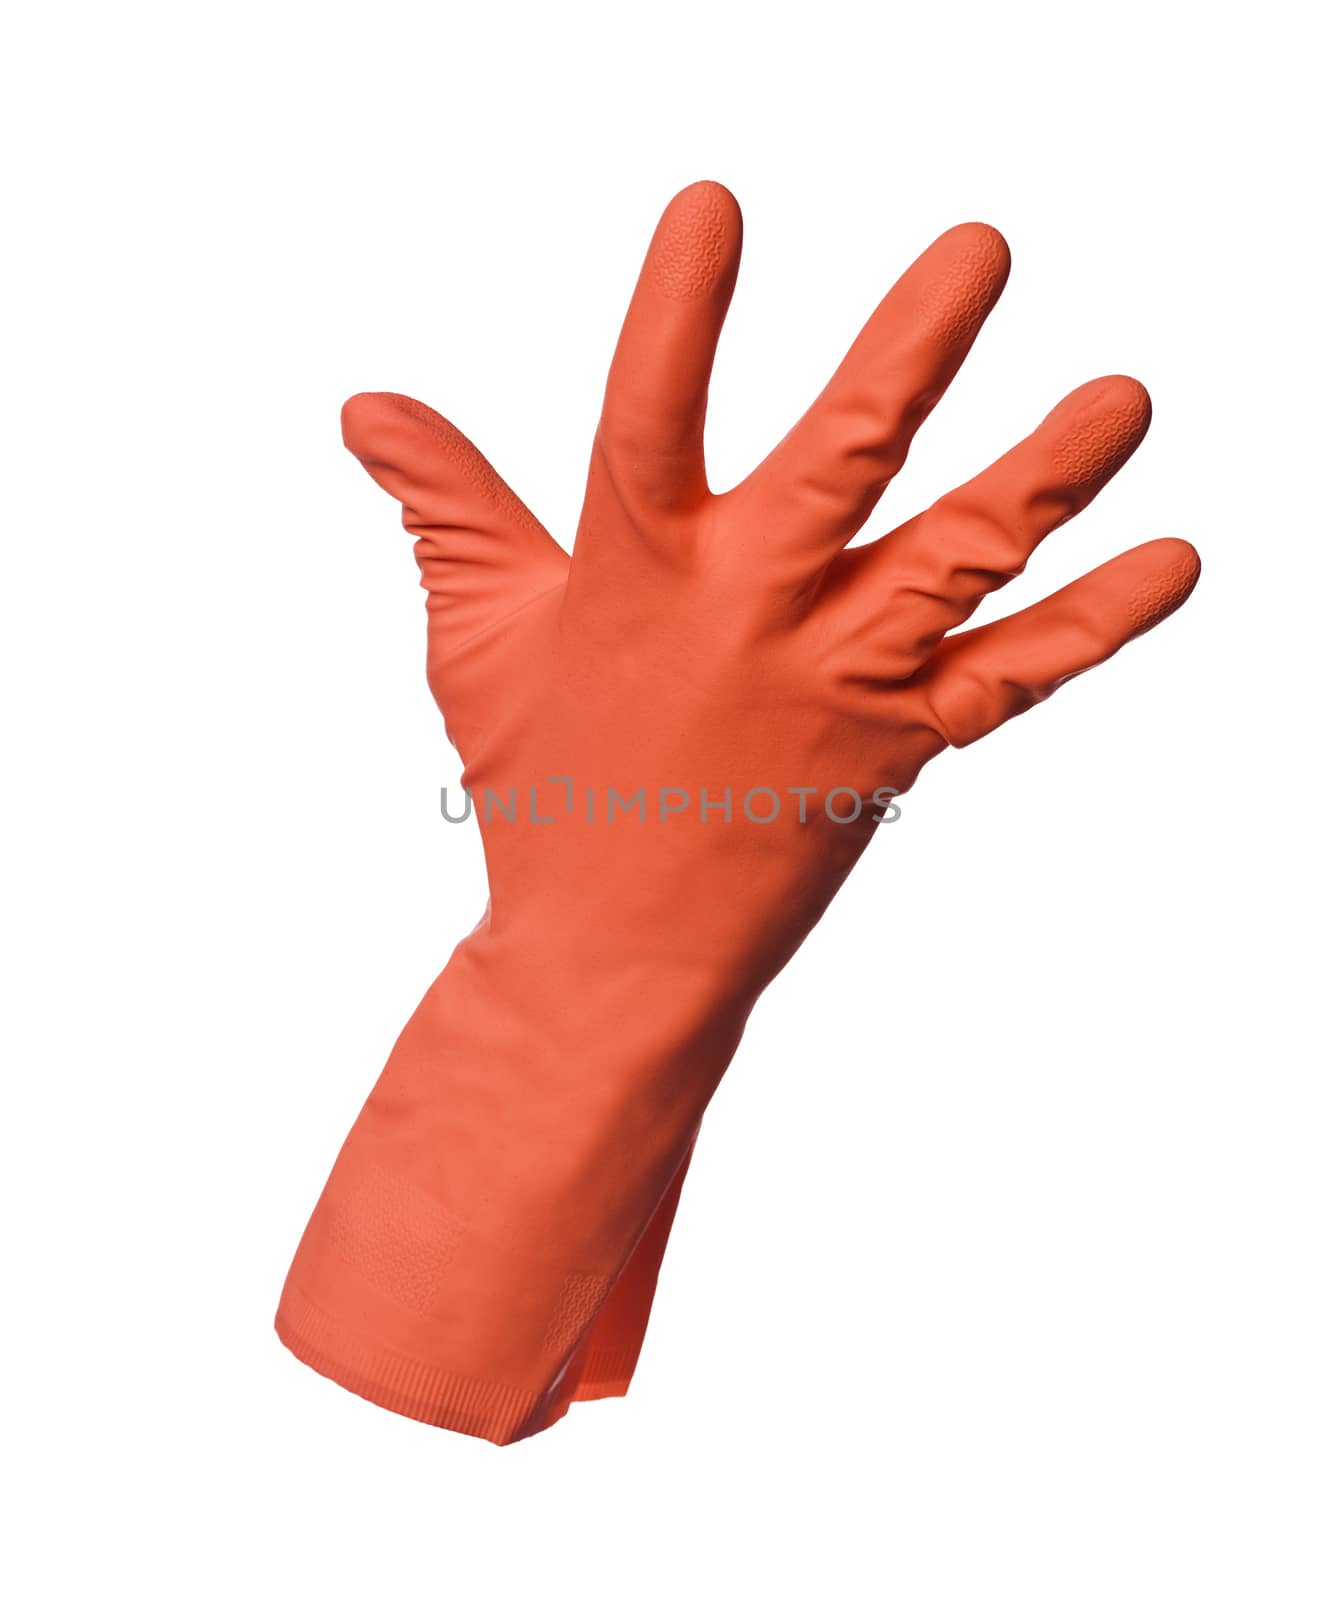 Red protection glove isolated on white background by gemenacom